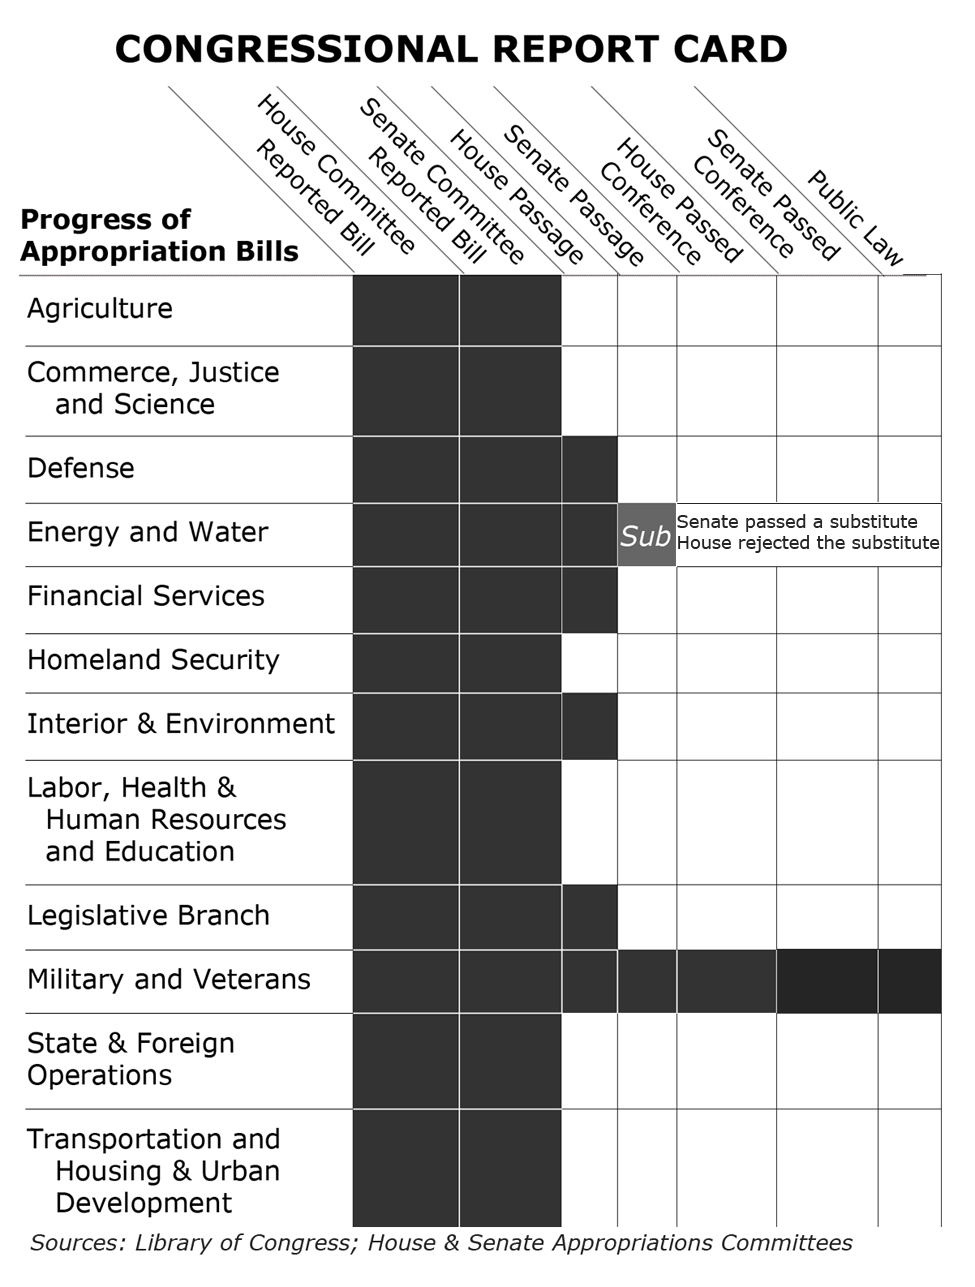 Congressional progress on appropriation bills shows they are not taking their jobs seriously.